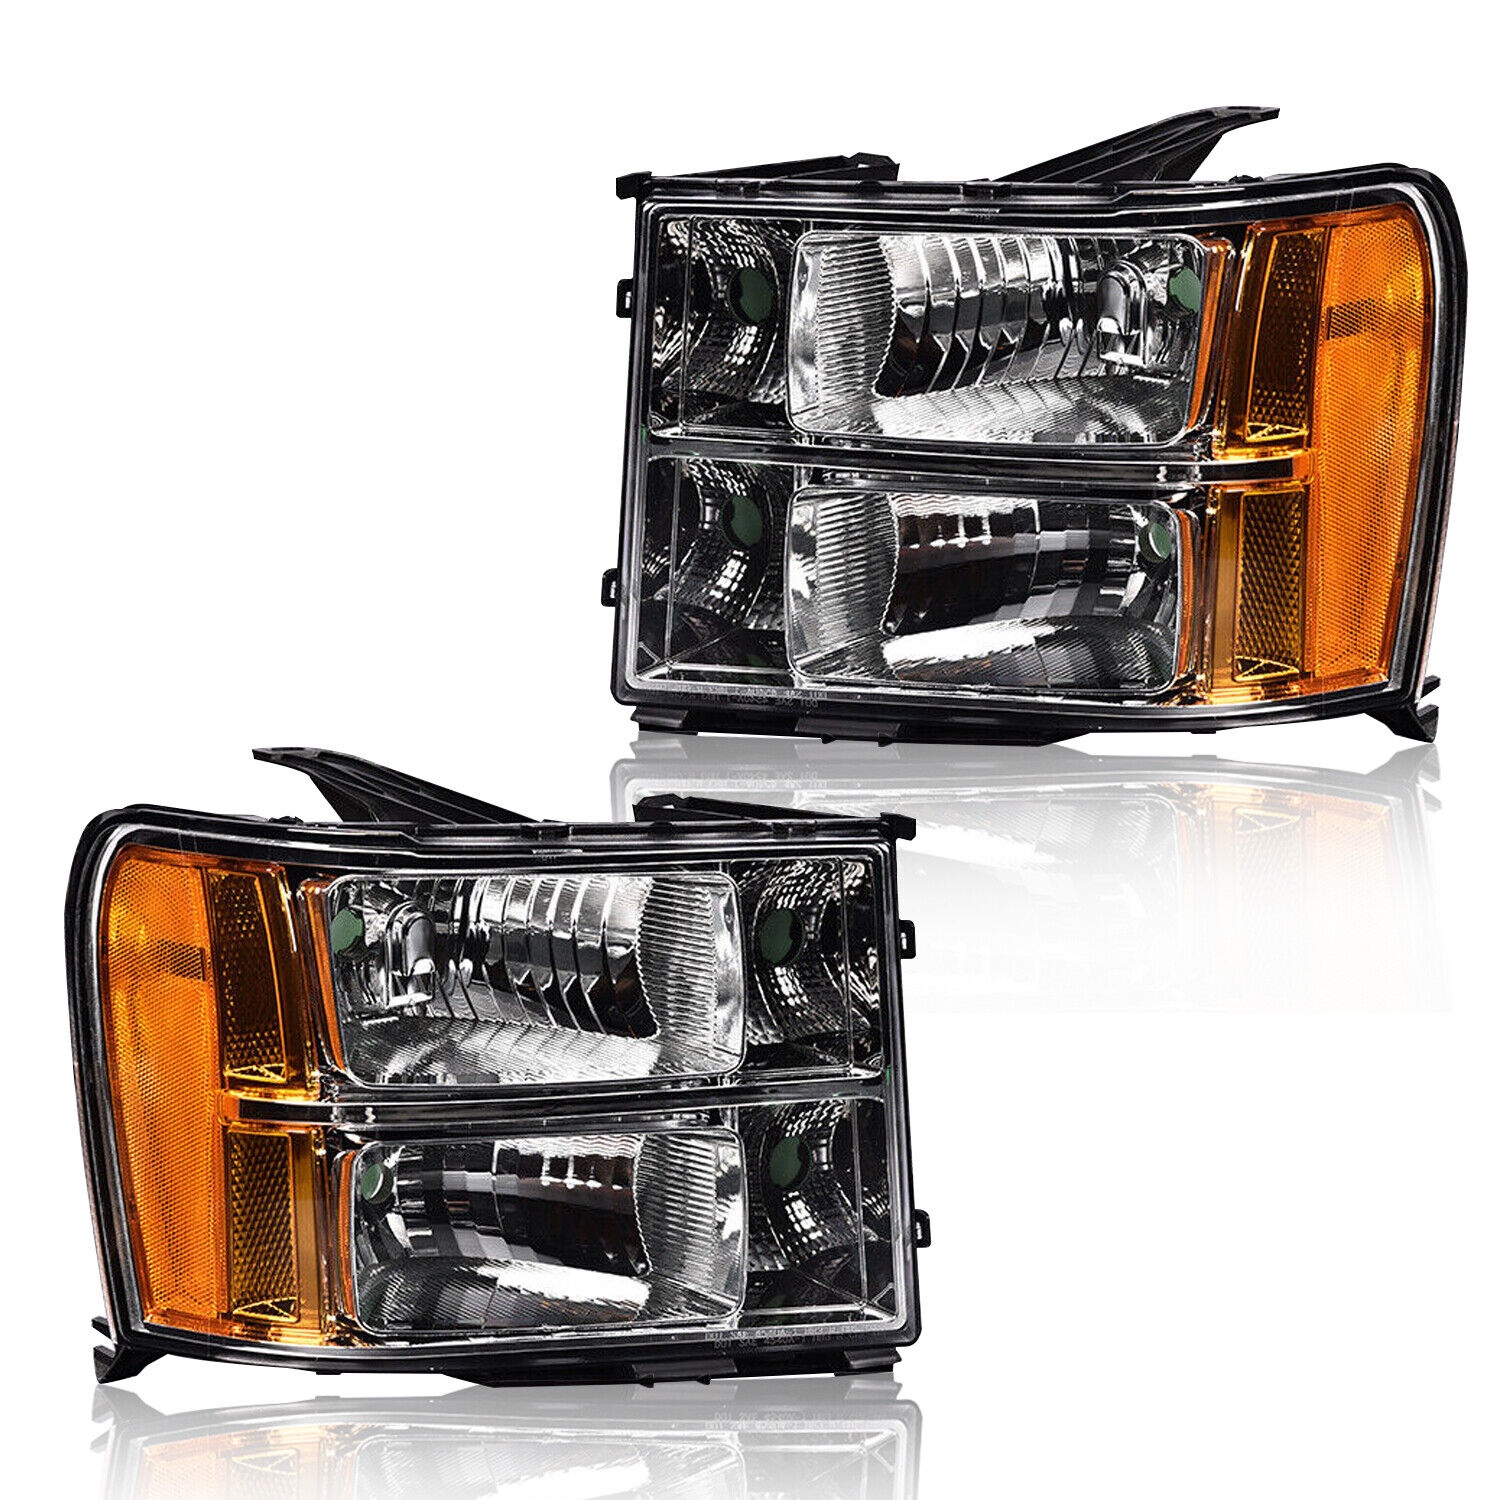 2X Left & Right Side Headlights Headlamps Clear For 2007-2013 GMC Sierra 1500